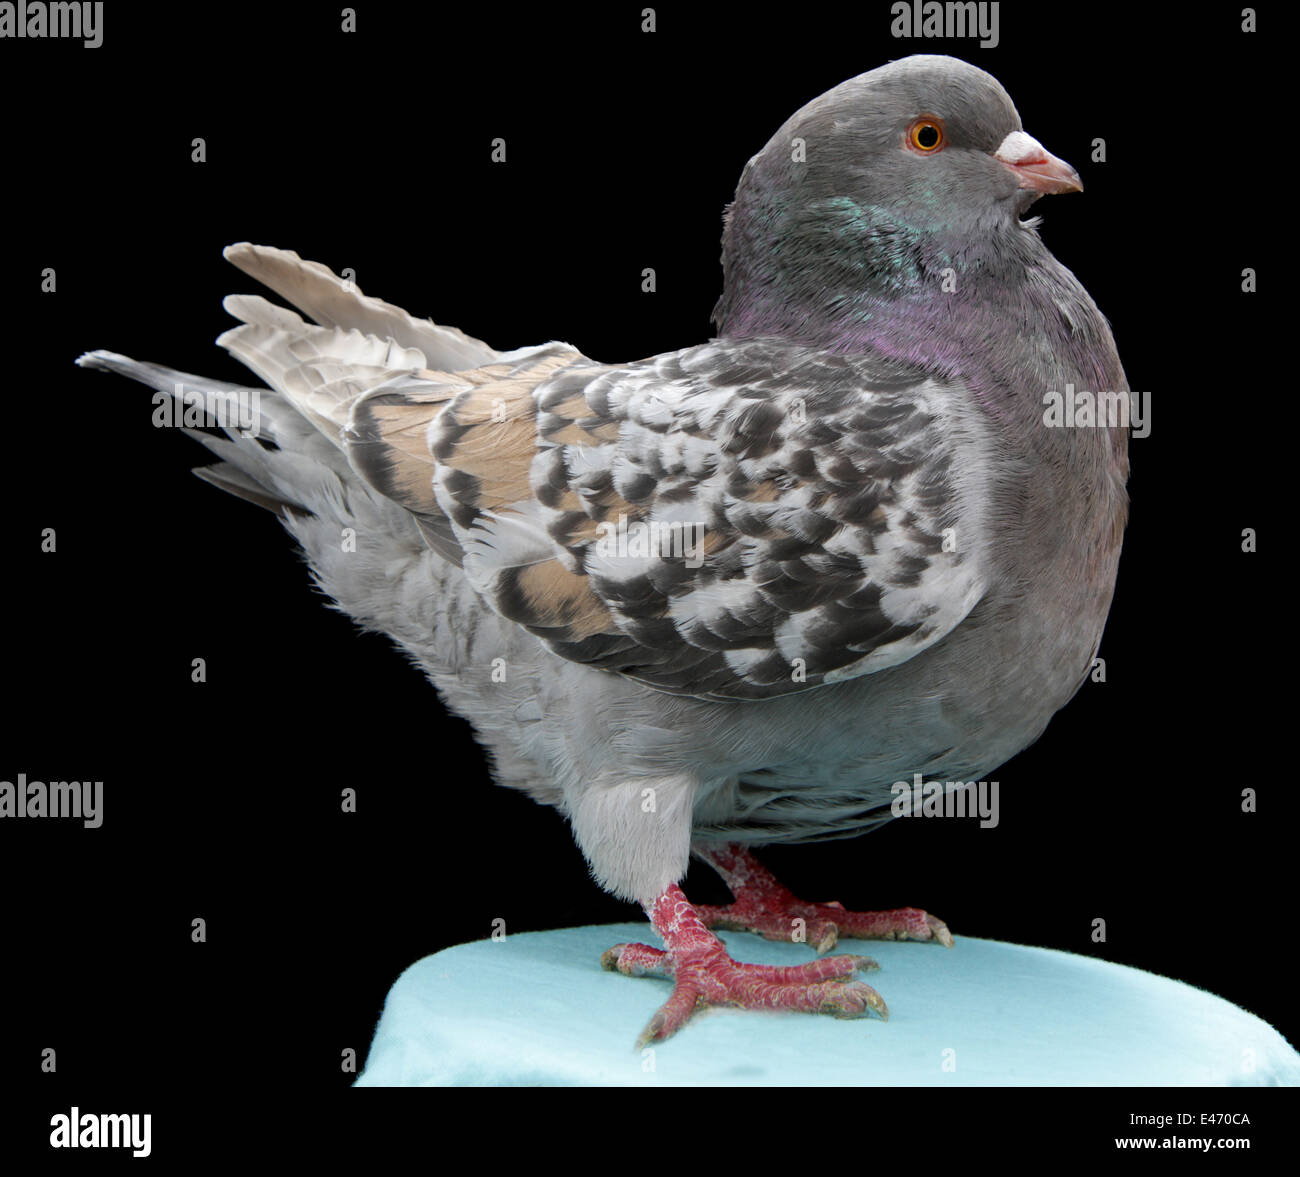 A Modena, a breed of fancy pigeon, at the Faircount Pigeon Show, Ansonia, Connecticut, U.S.A. Stock Photo